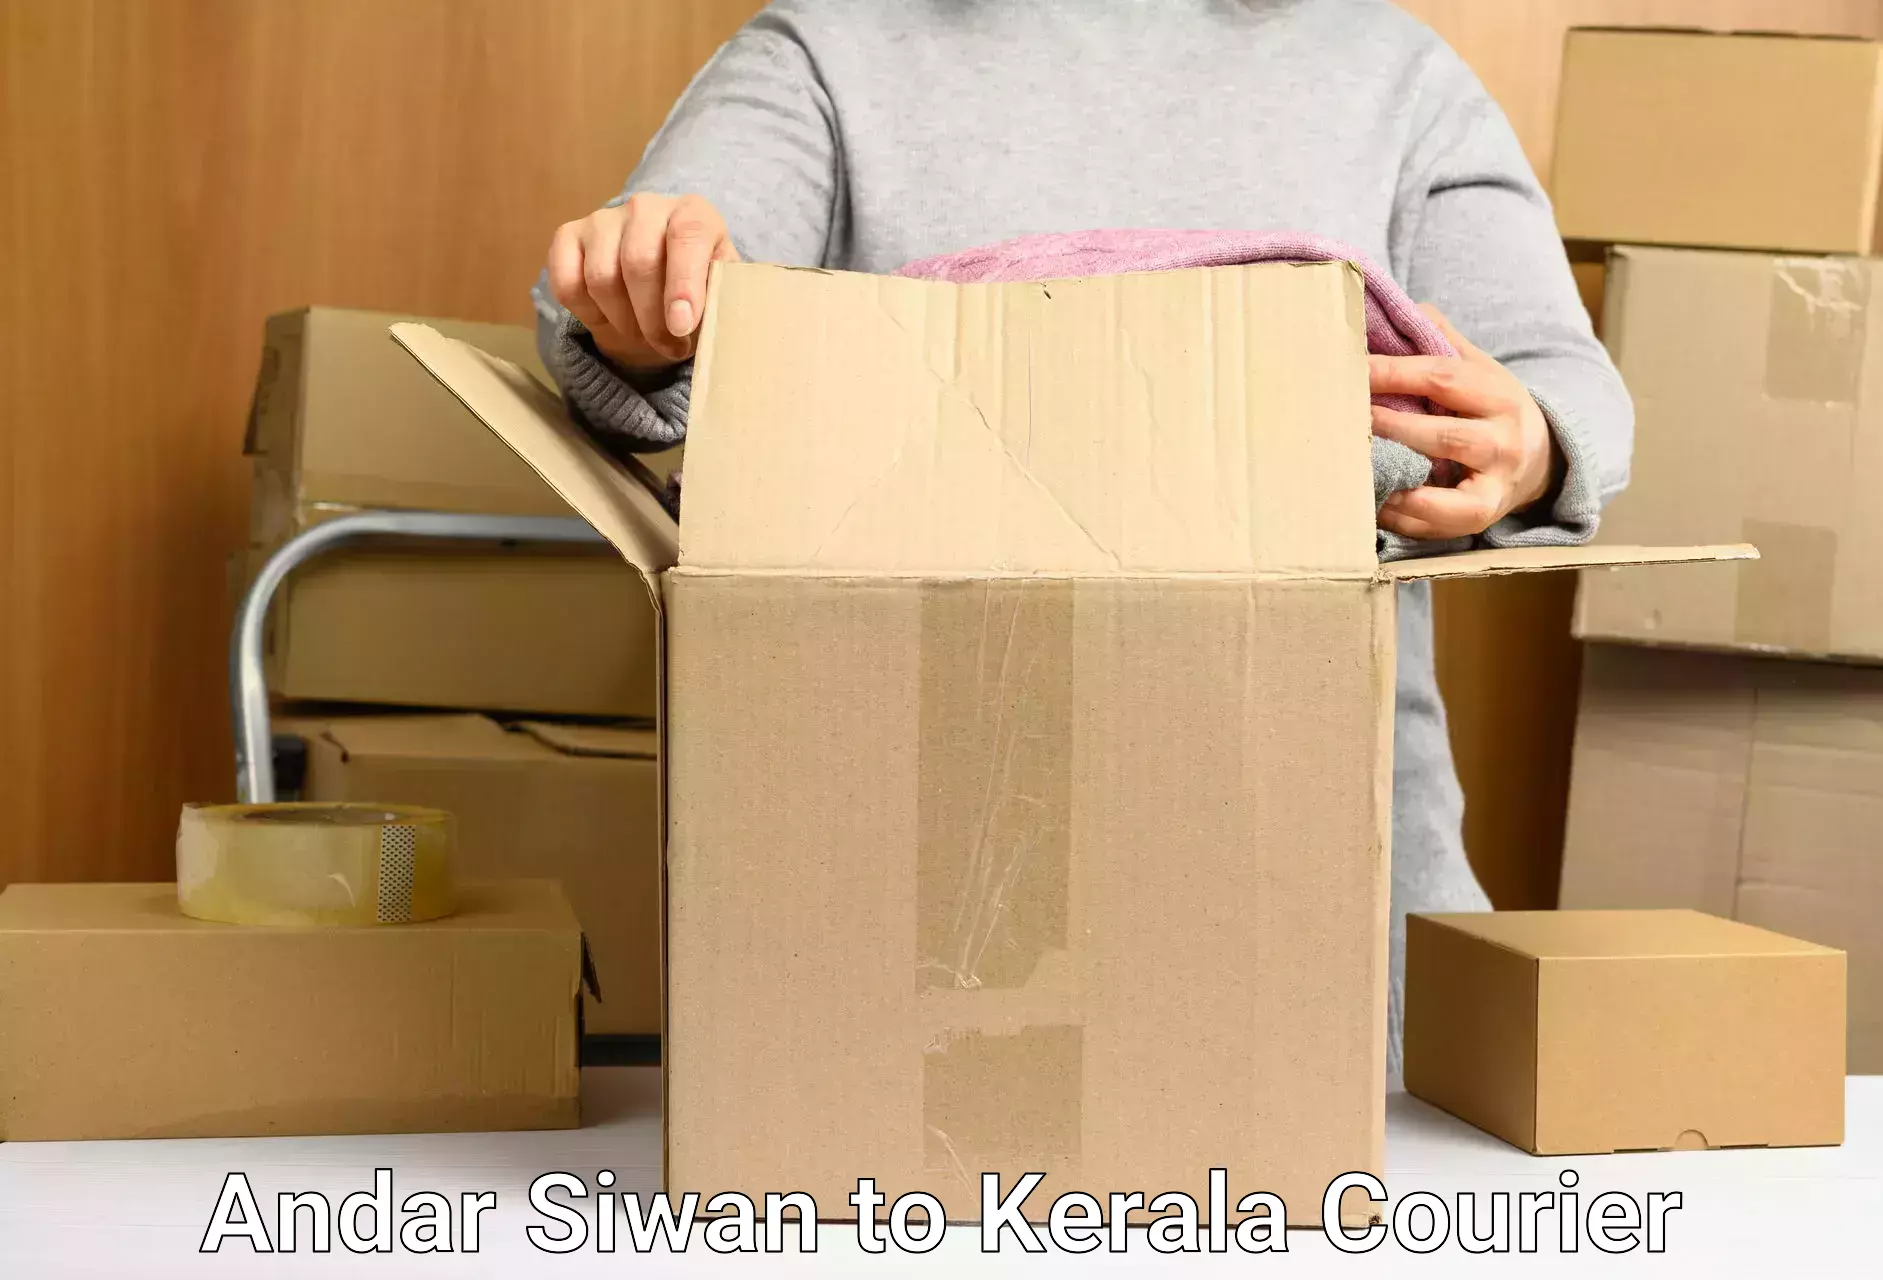 Courier service innovation Andar Siwan to Kerala